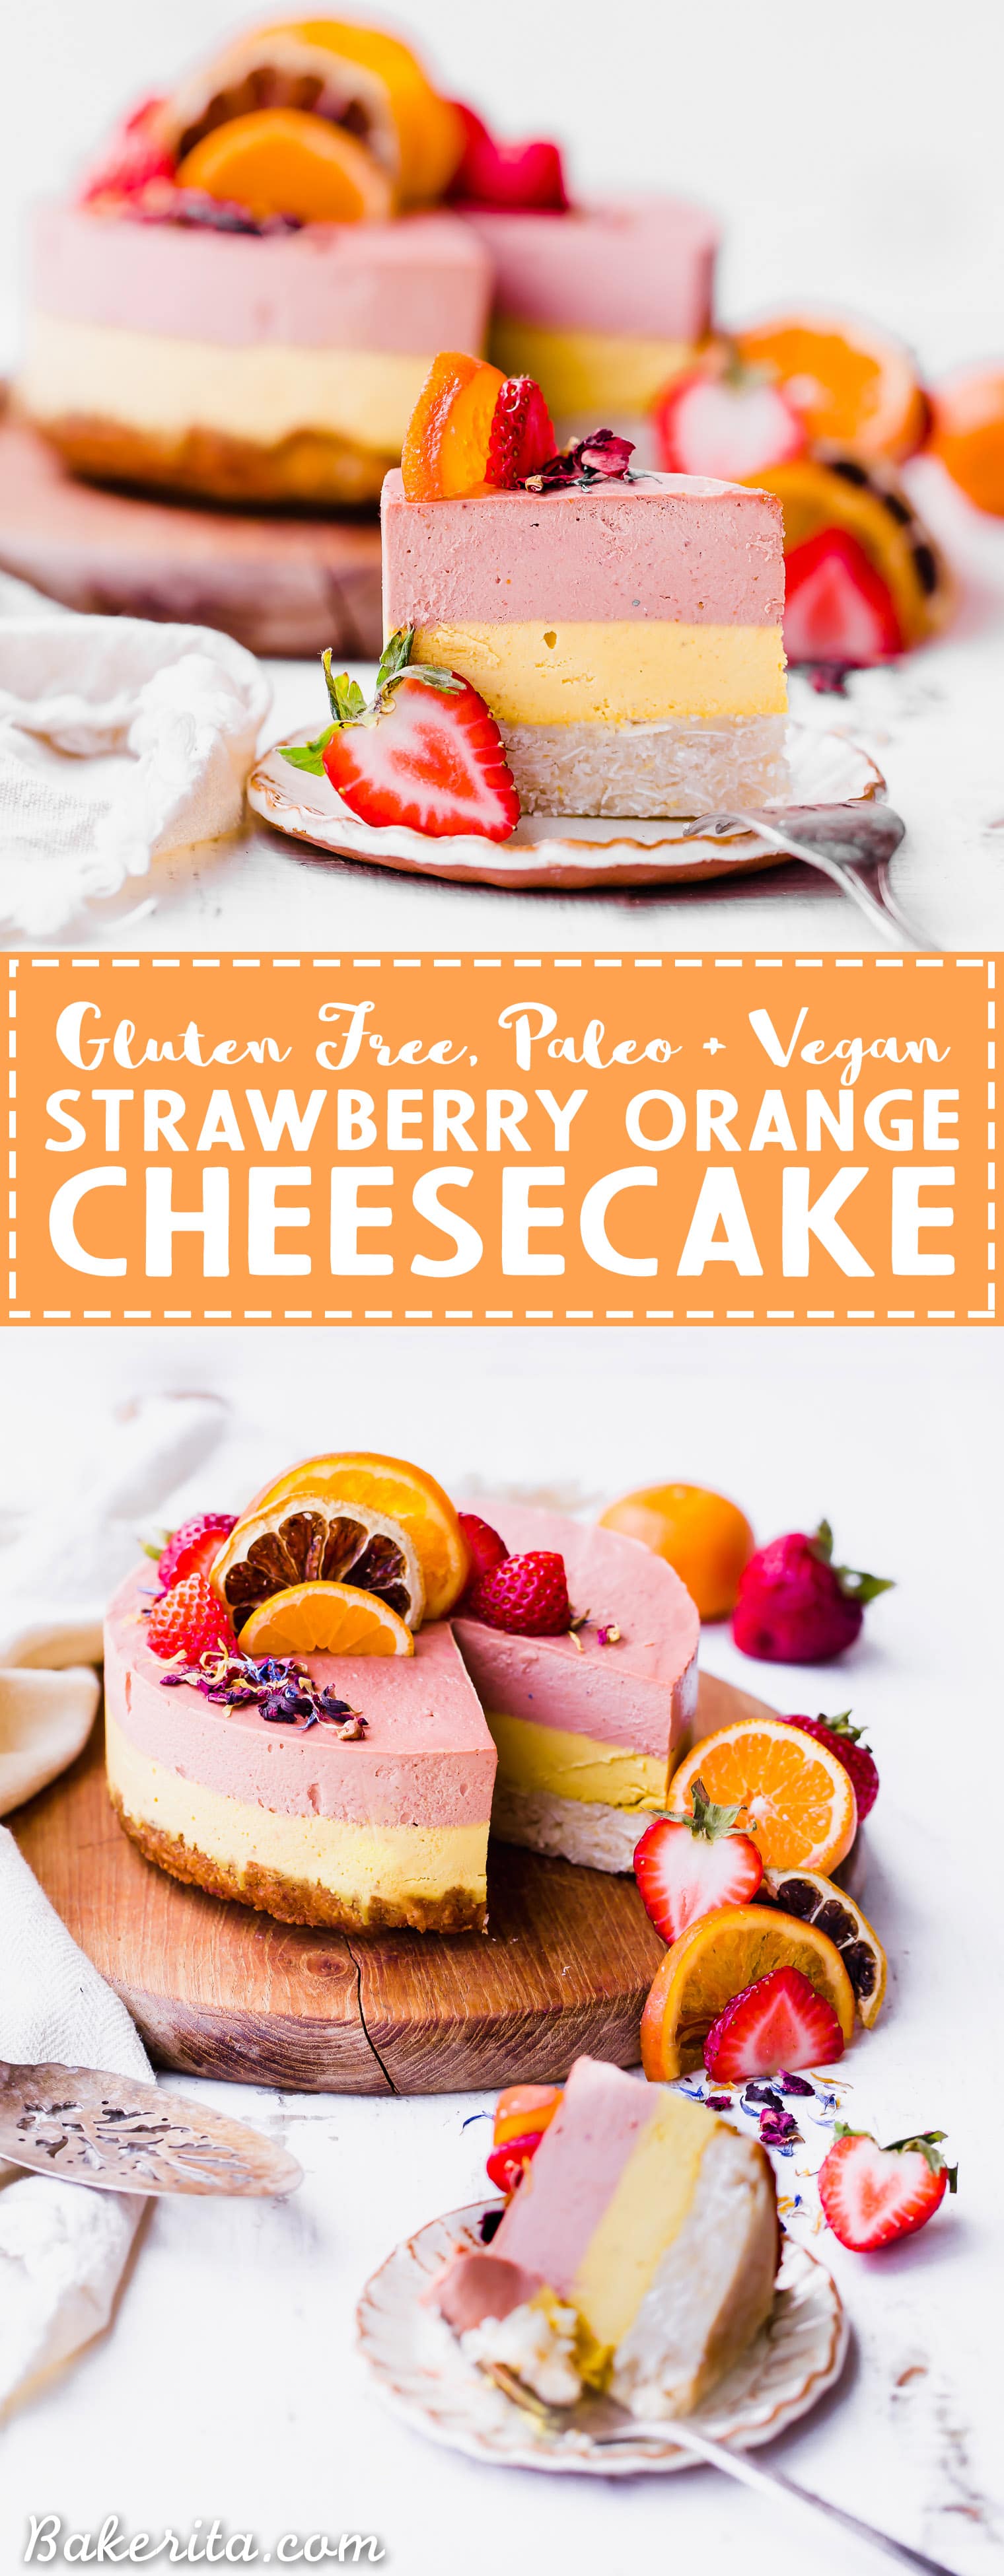 This Strawberry Orange Cheesecake with Coconut Crust is not just beautiful, but it's bright in flavor and absolutely delicious! The lemony coconut macaroon crust is perfect with the strawberry and orange flavors. You're going to adore this gluten-free, paleo and vegan cheesecake.